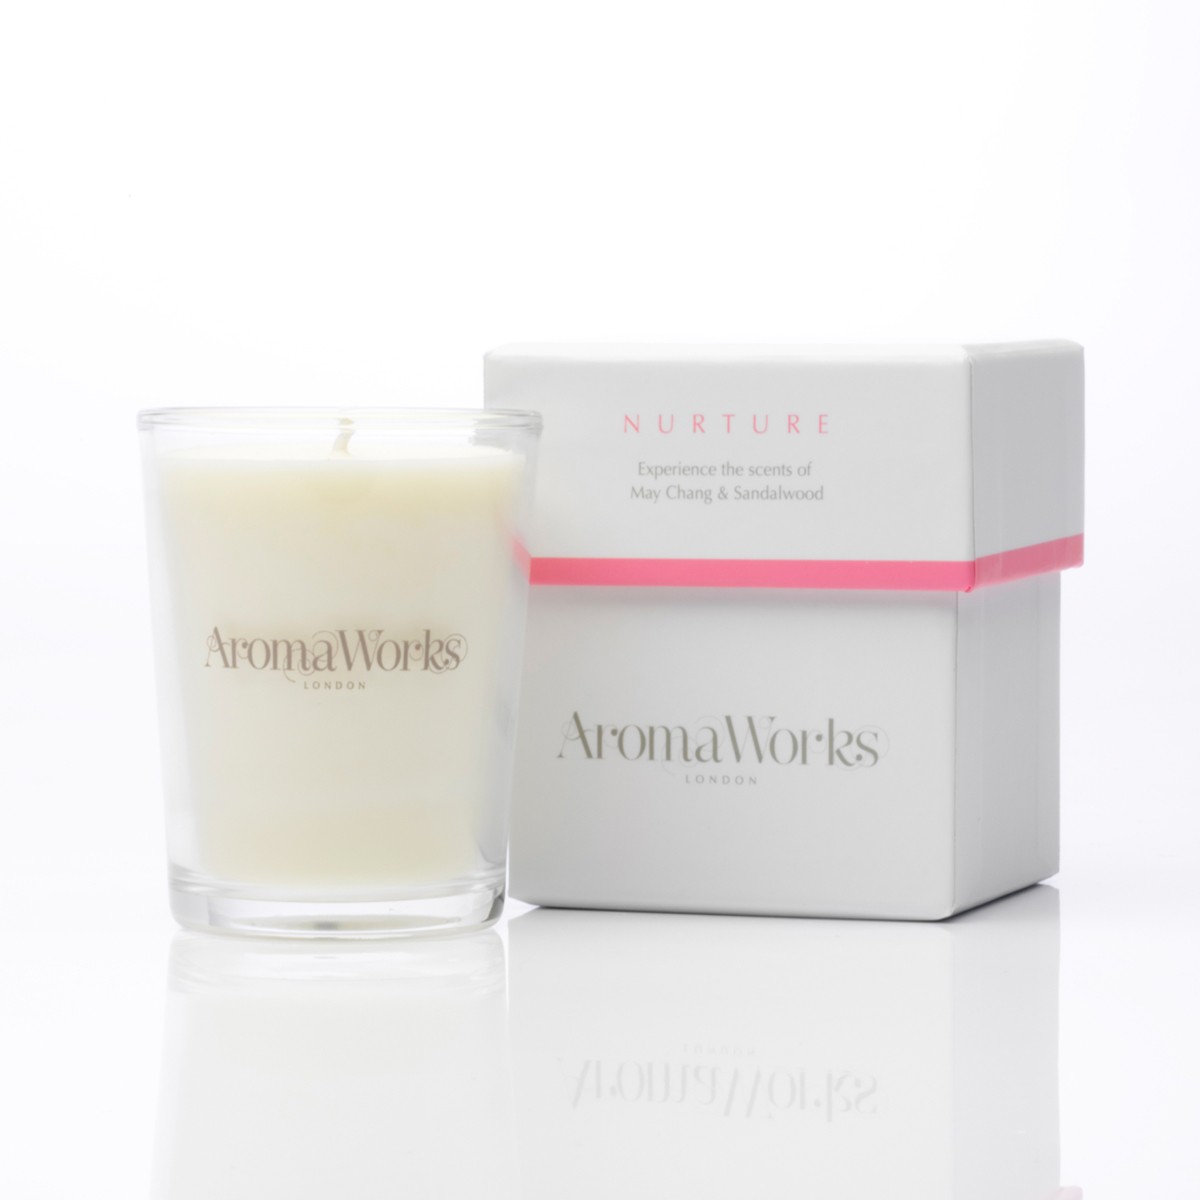 Aromaworks Nurture Candle Small 10 cl 